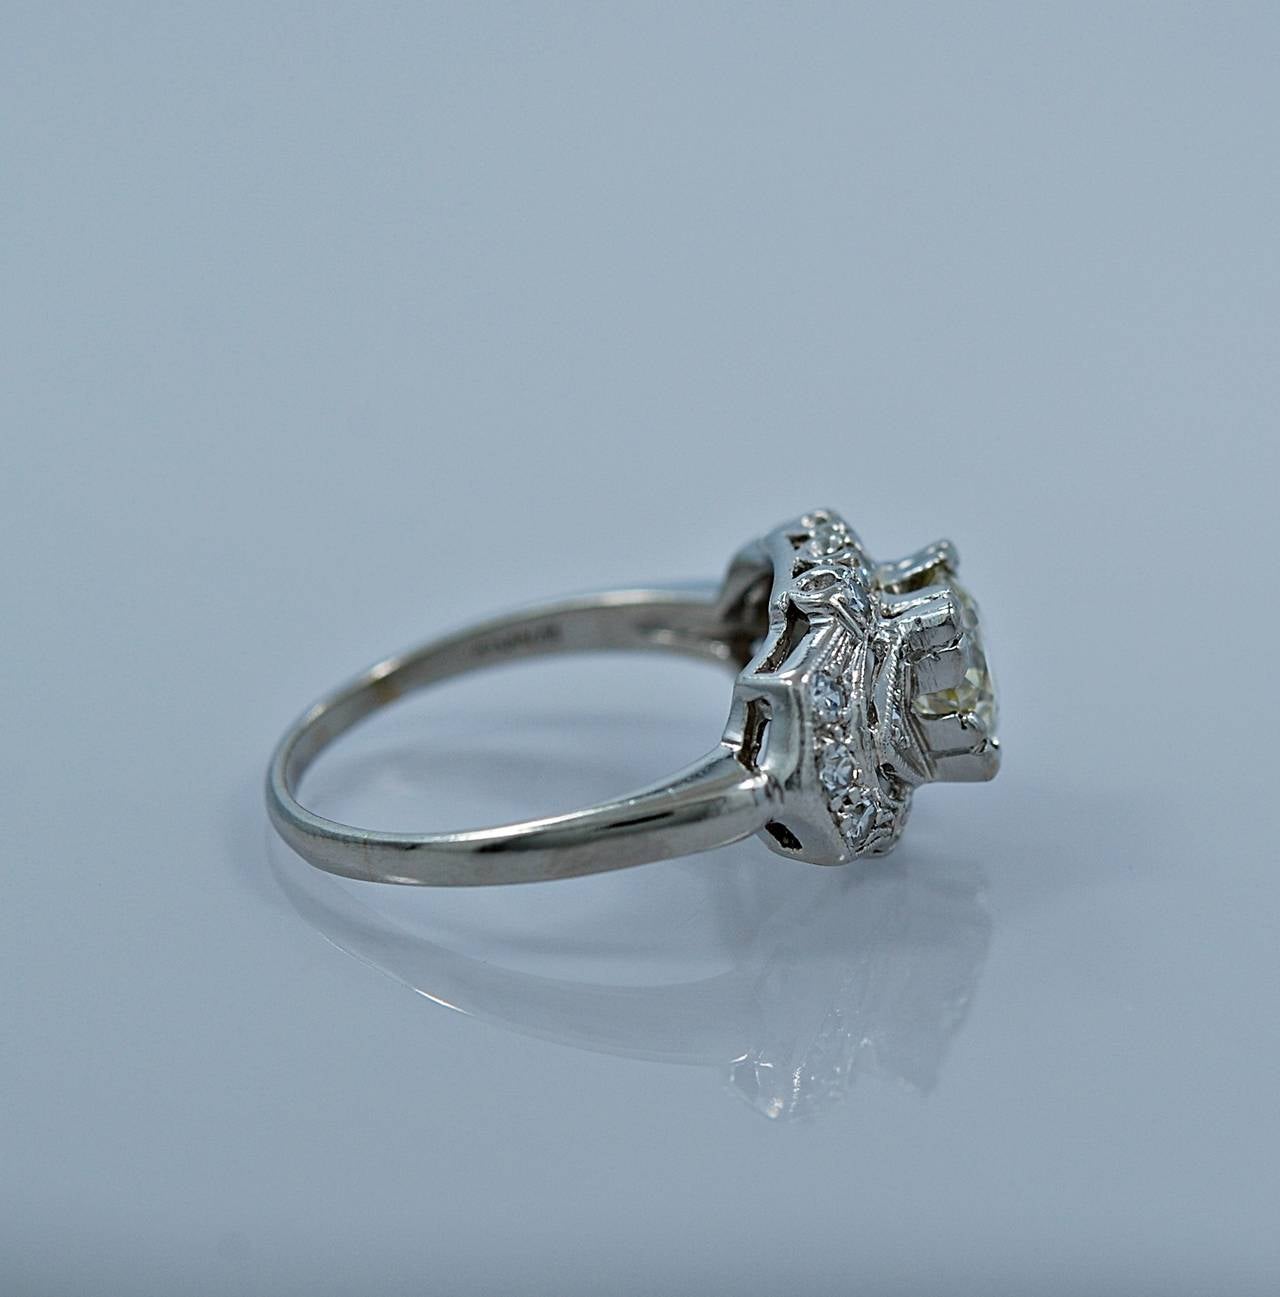 A beautifully designed Art Deco diamond engagement ring crafted in platinum and features a 1.00ct. apx. European cut diamond of VS1 clarity and J-K color. The center diamond is also accompanied by .33ct. apx. T.W. of diamond melee which adds